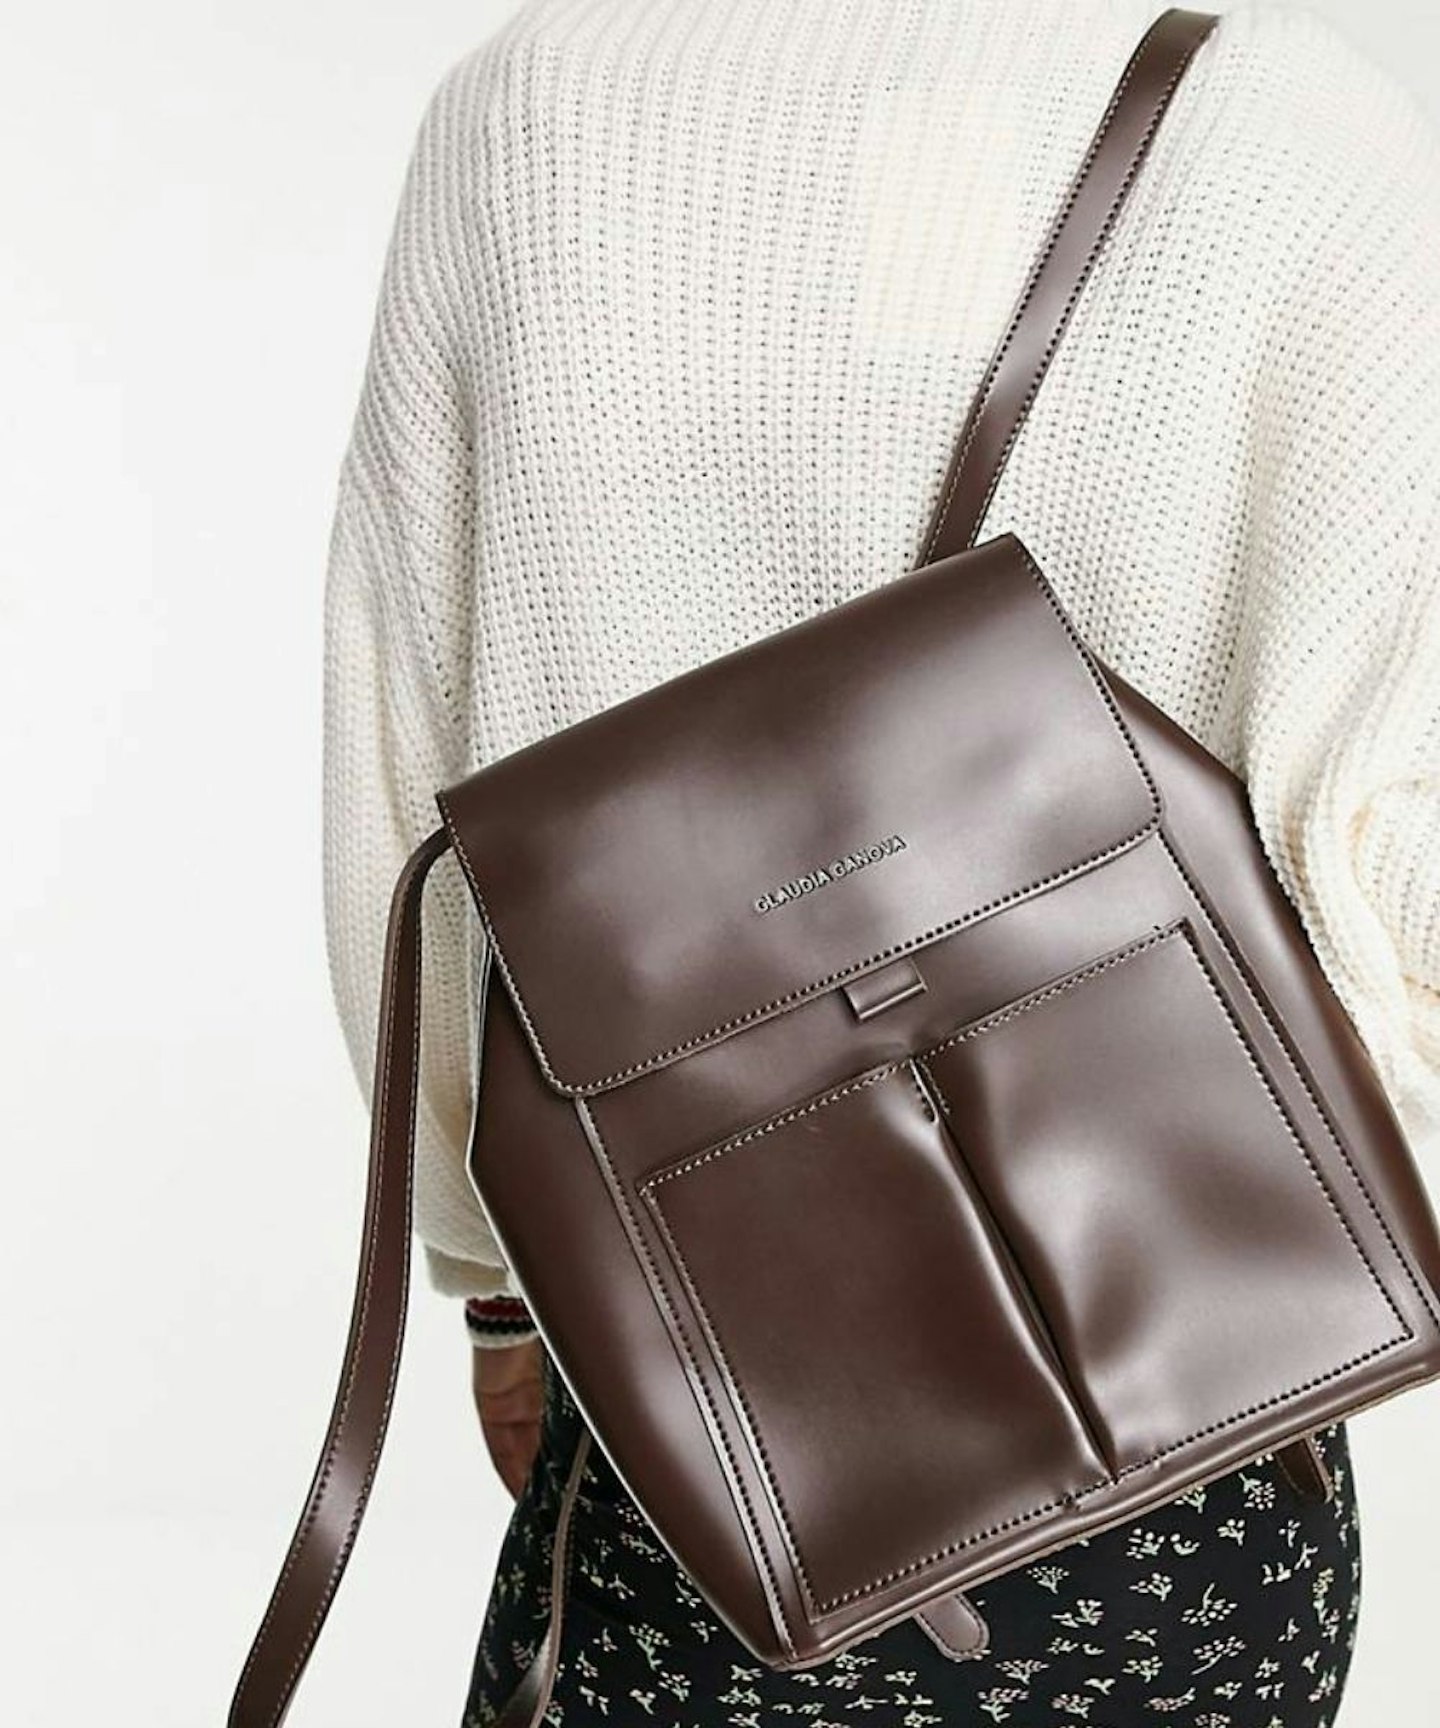 Claudia Canova two pocket backpack in chocolate